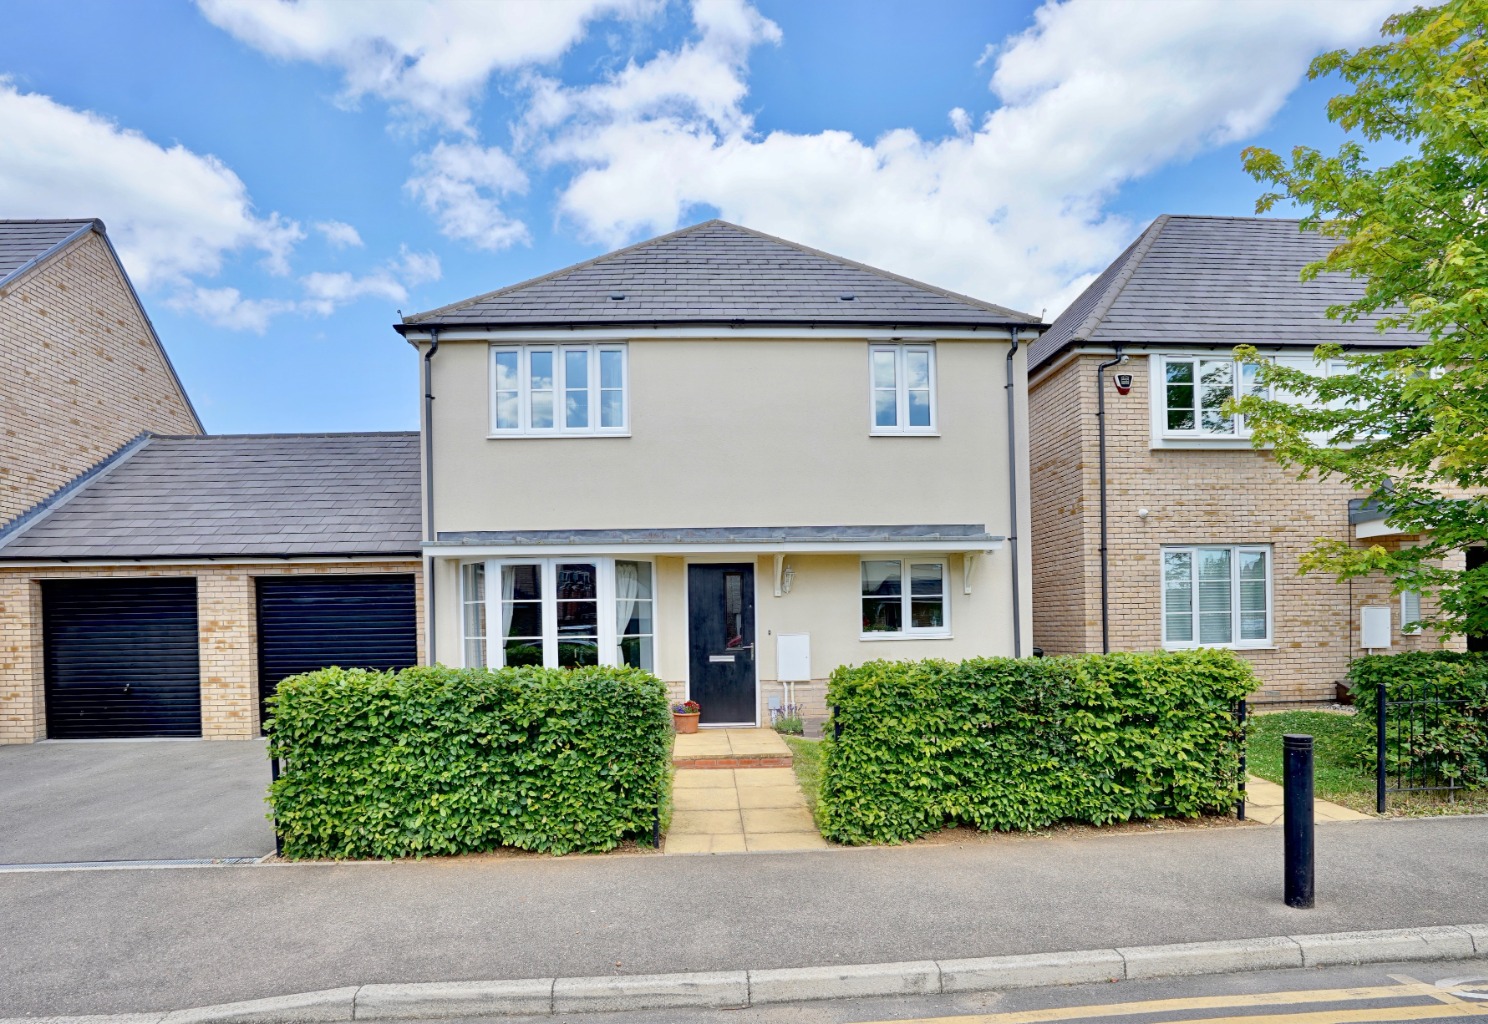 4 bed detached house for sale in Hogsden Leys, Cambridgeshire, PE19